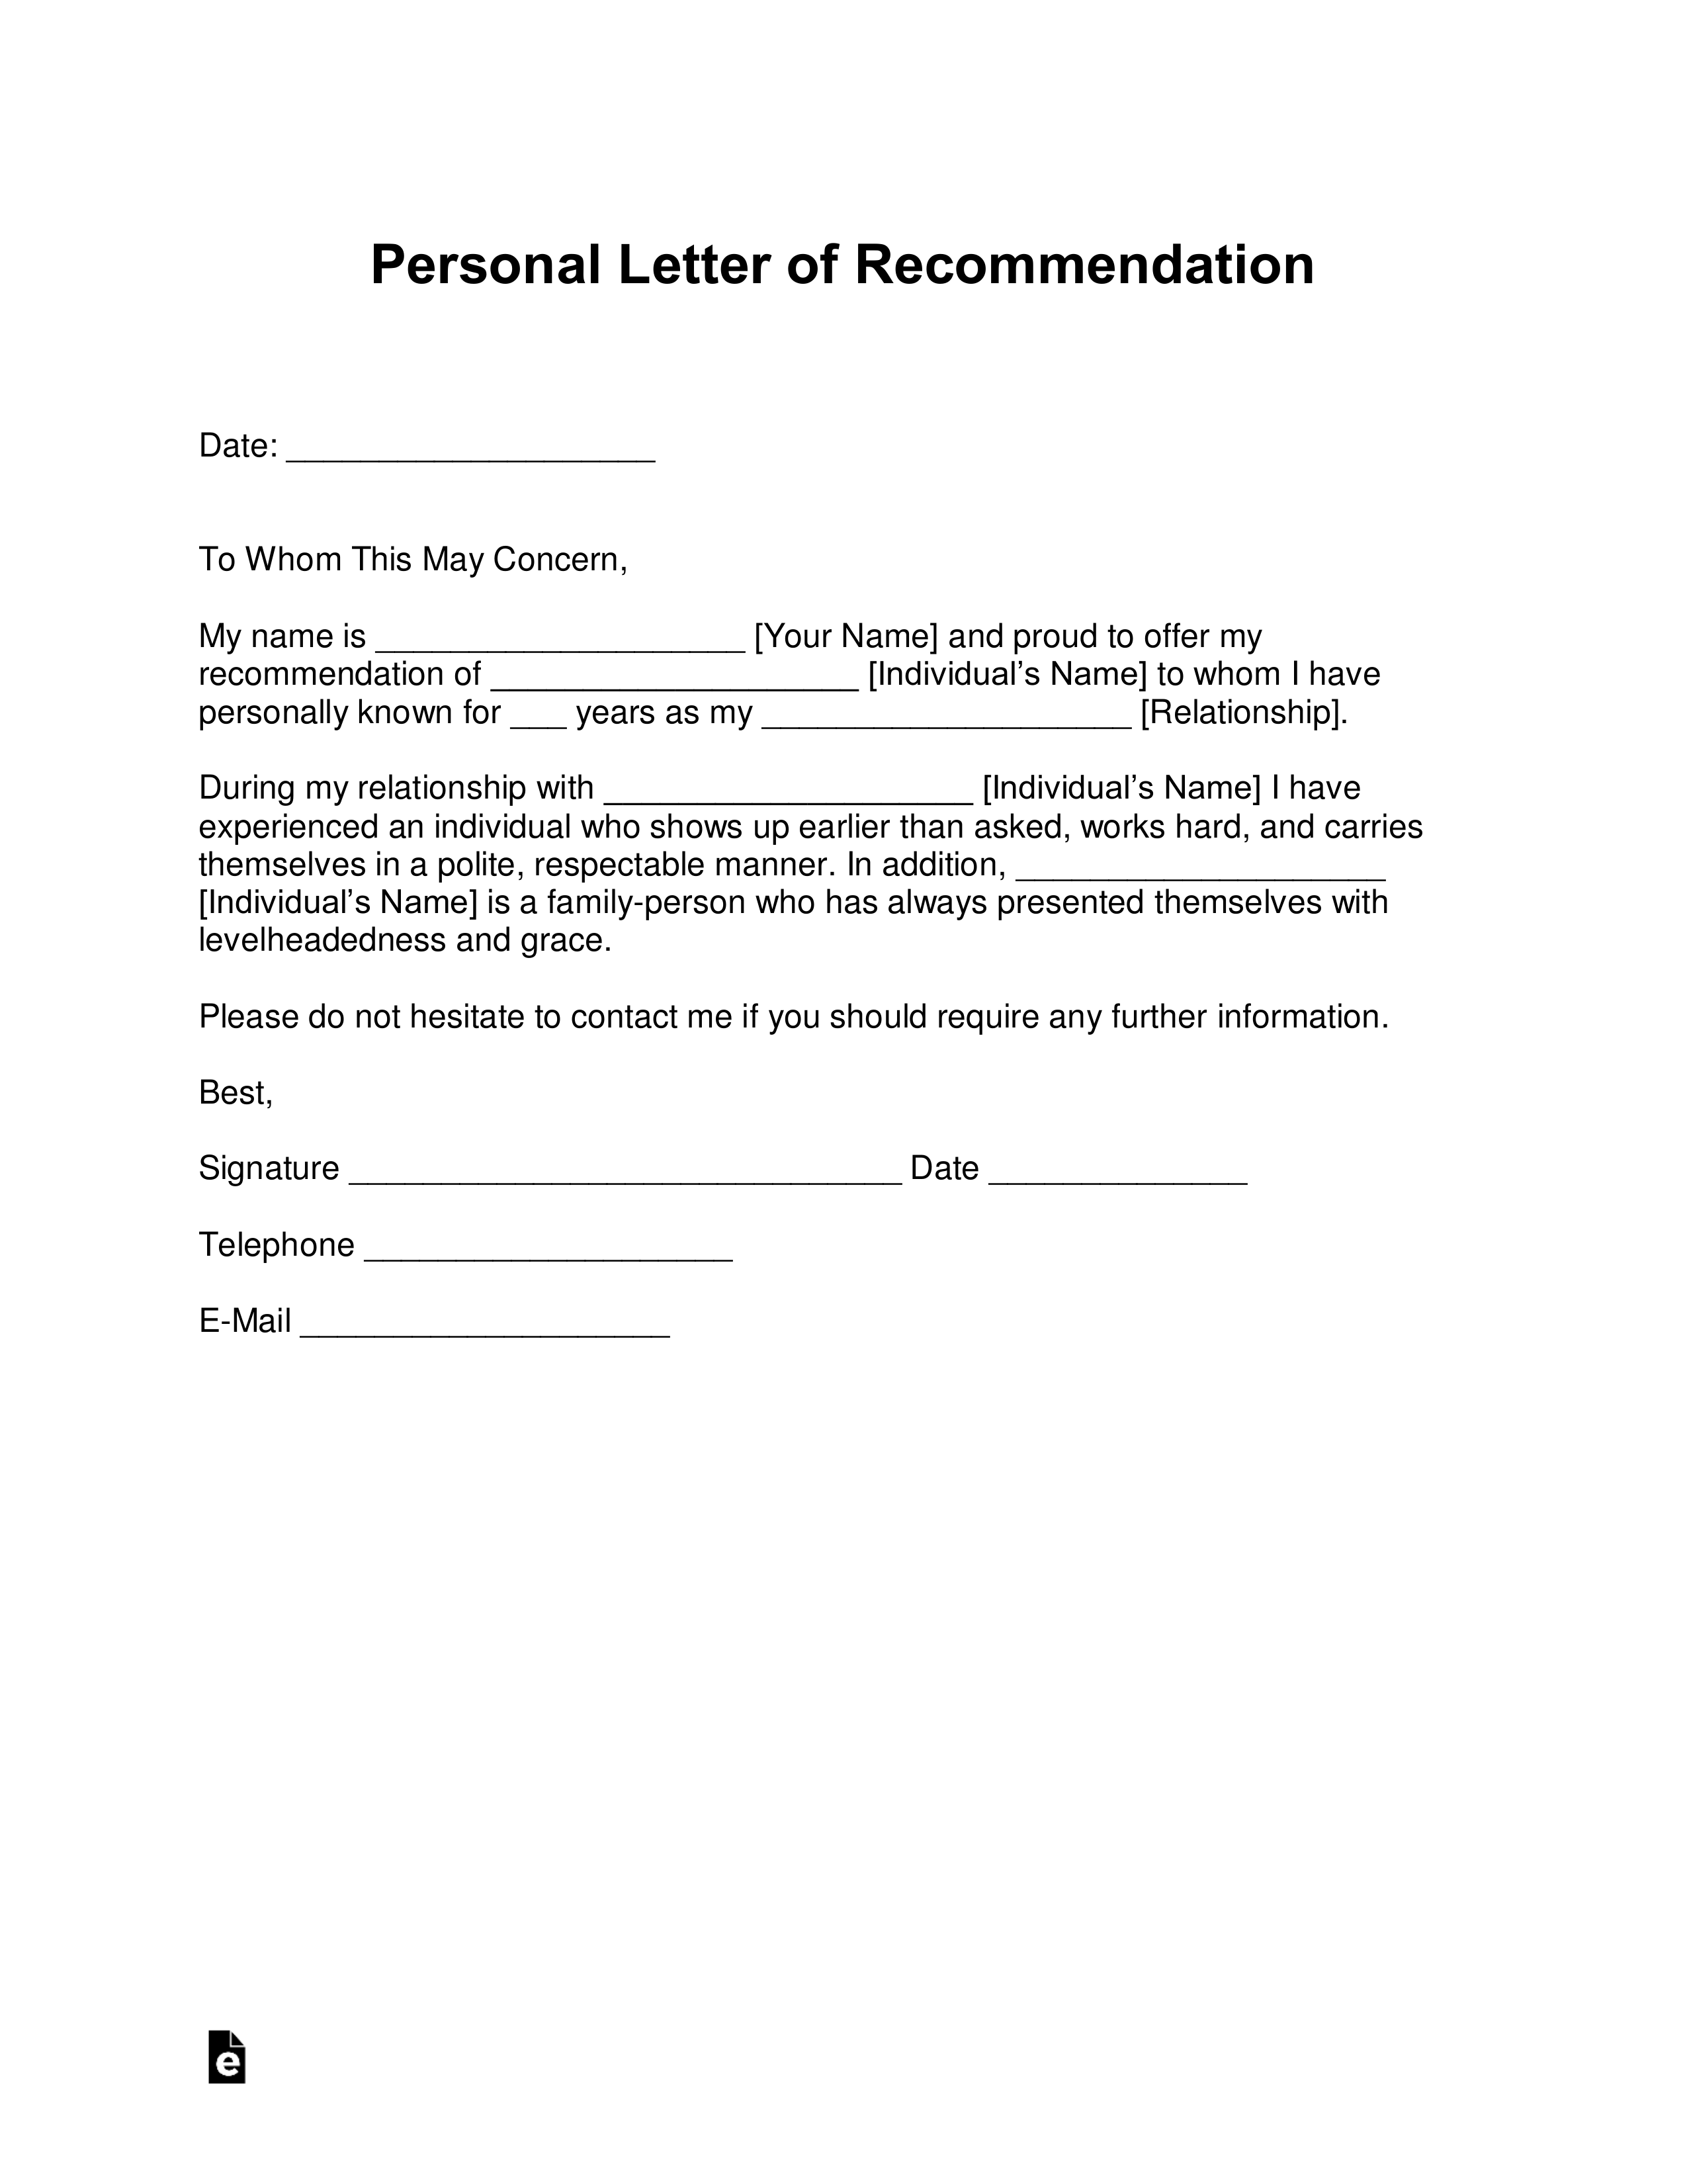 Personal Letter Of Recommendation For A Job